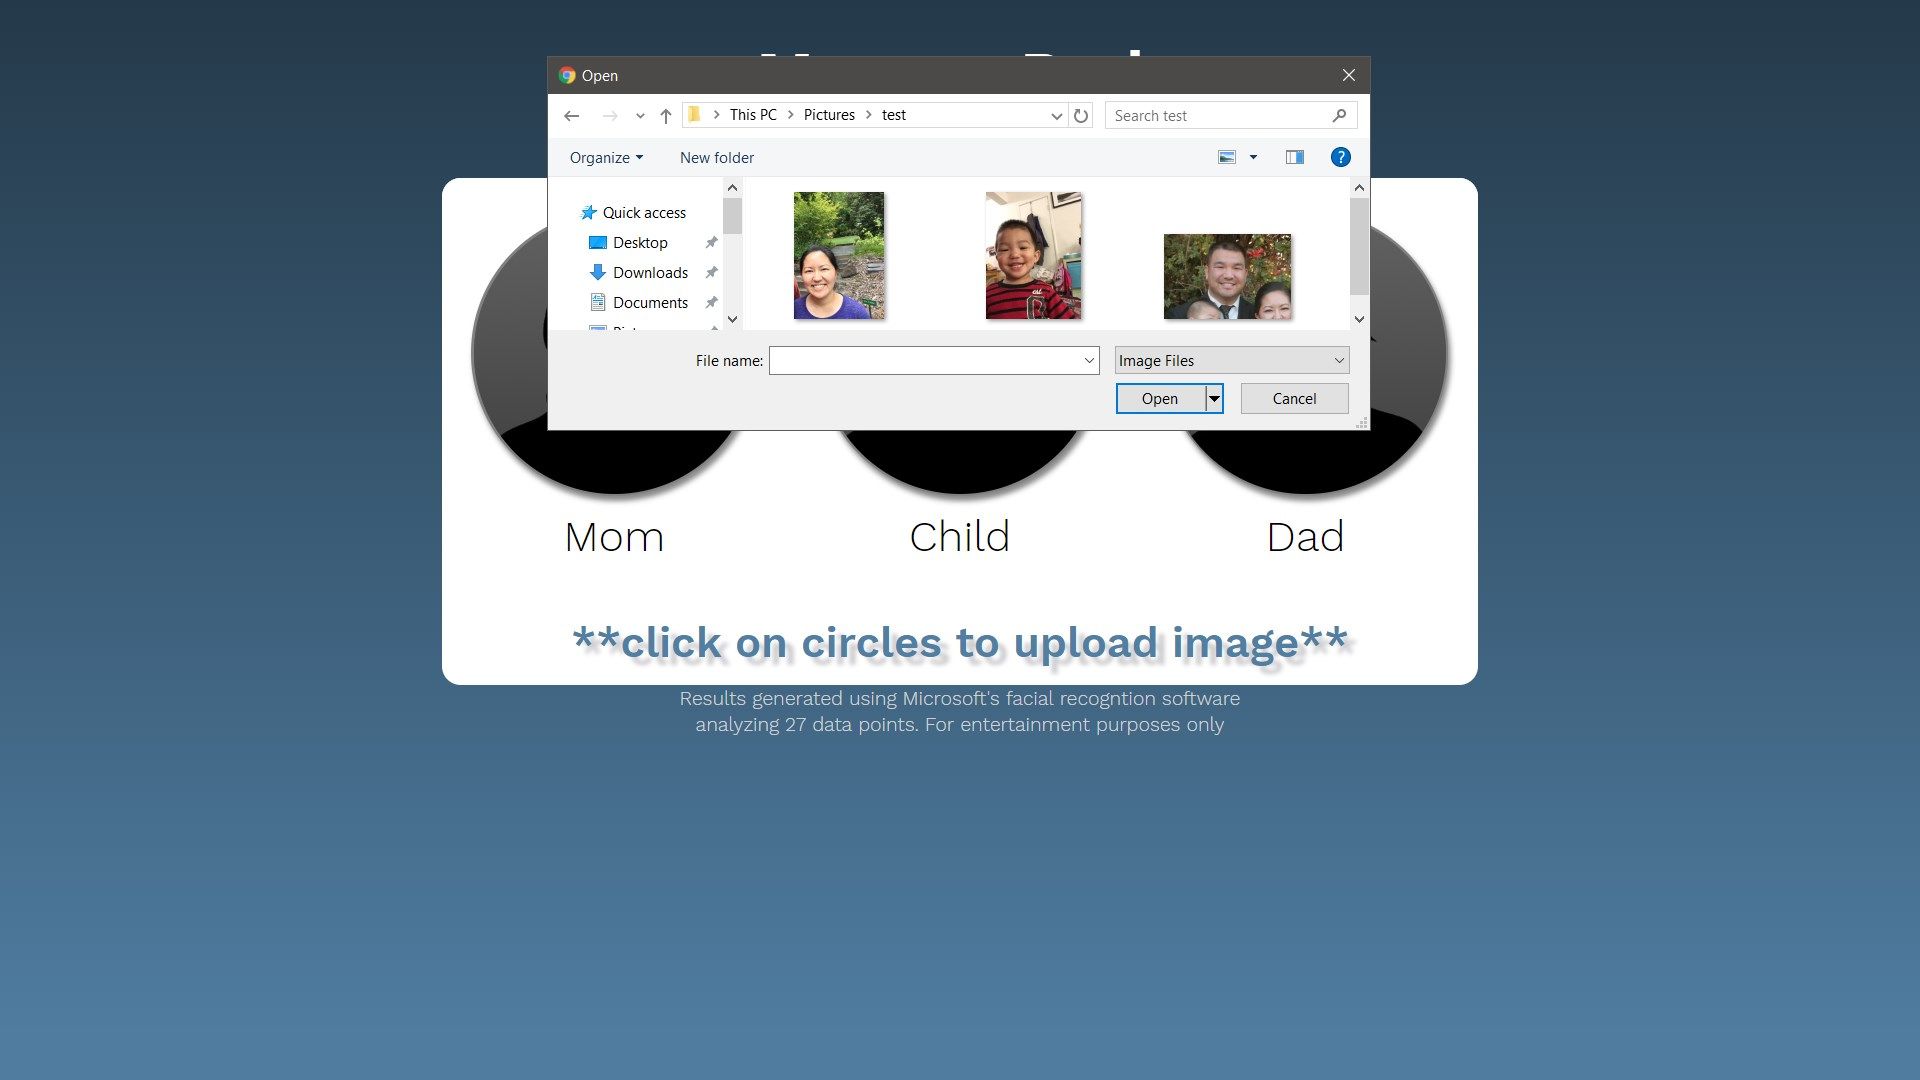 Clicking on the icon will bring up file explorer where you can select the images